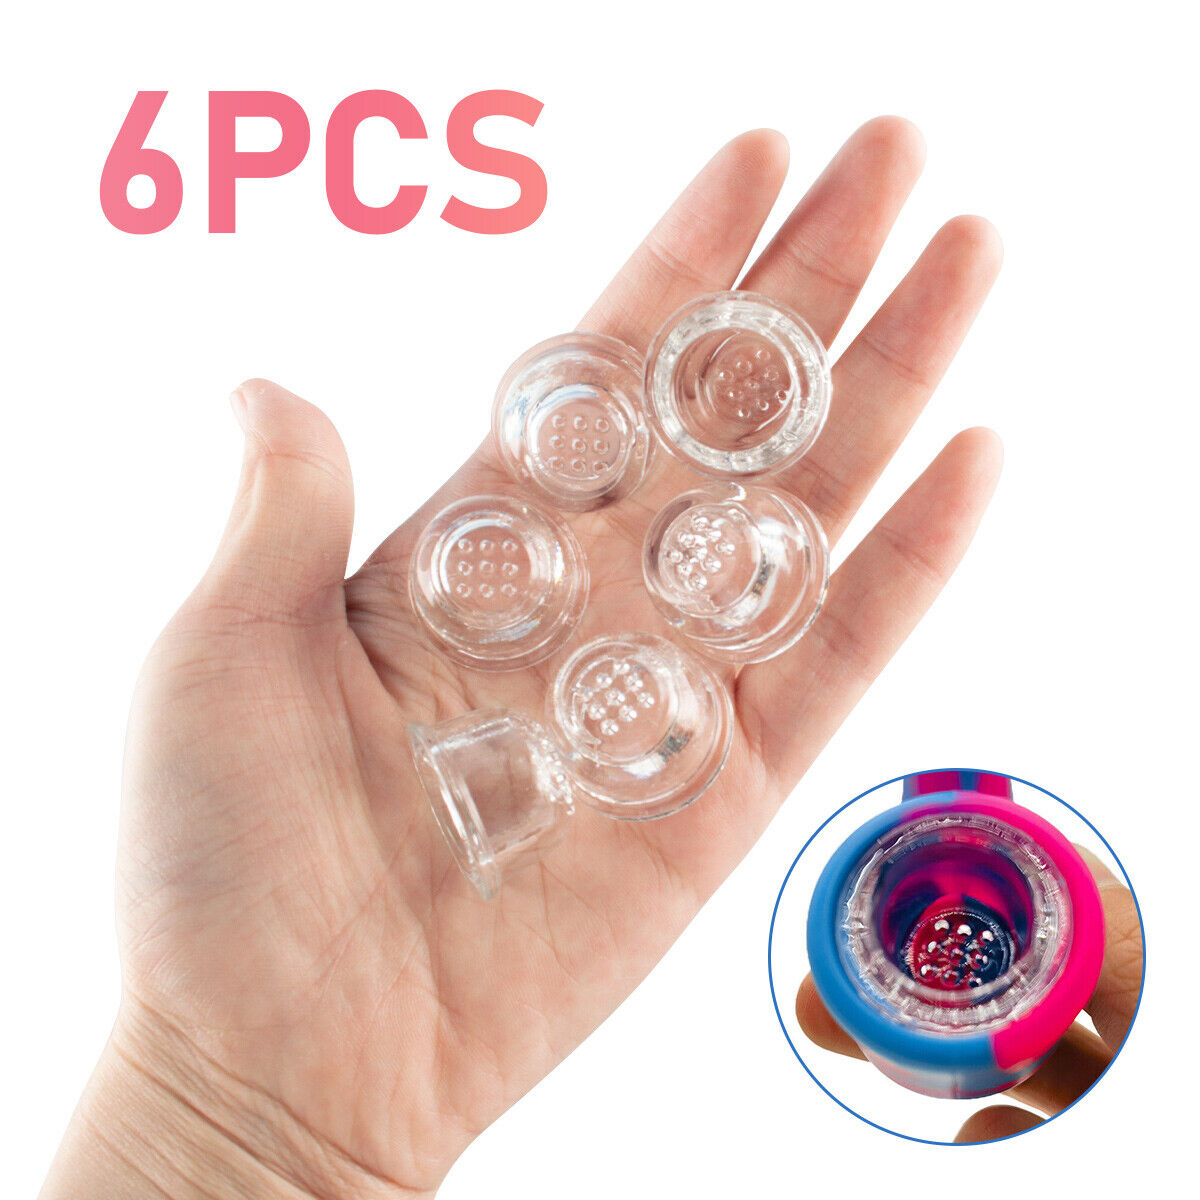 6pcs Replacement Glass Bowl for Silicone Smoking Pipe Tobacco Cigarette Pipe